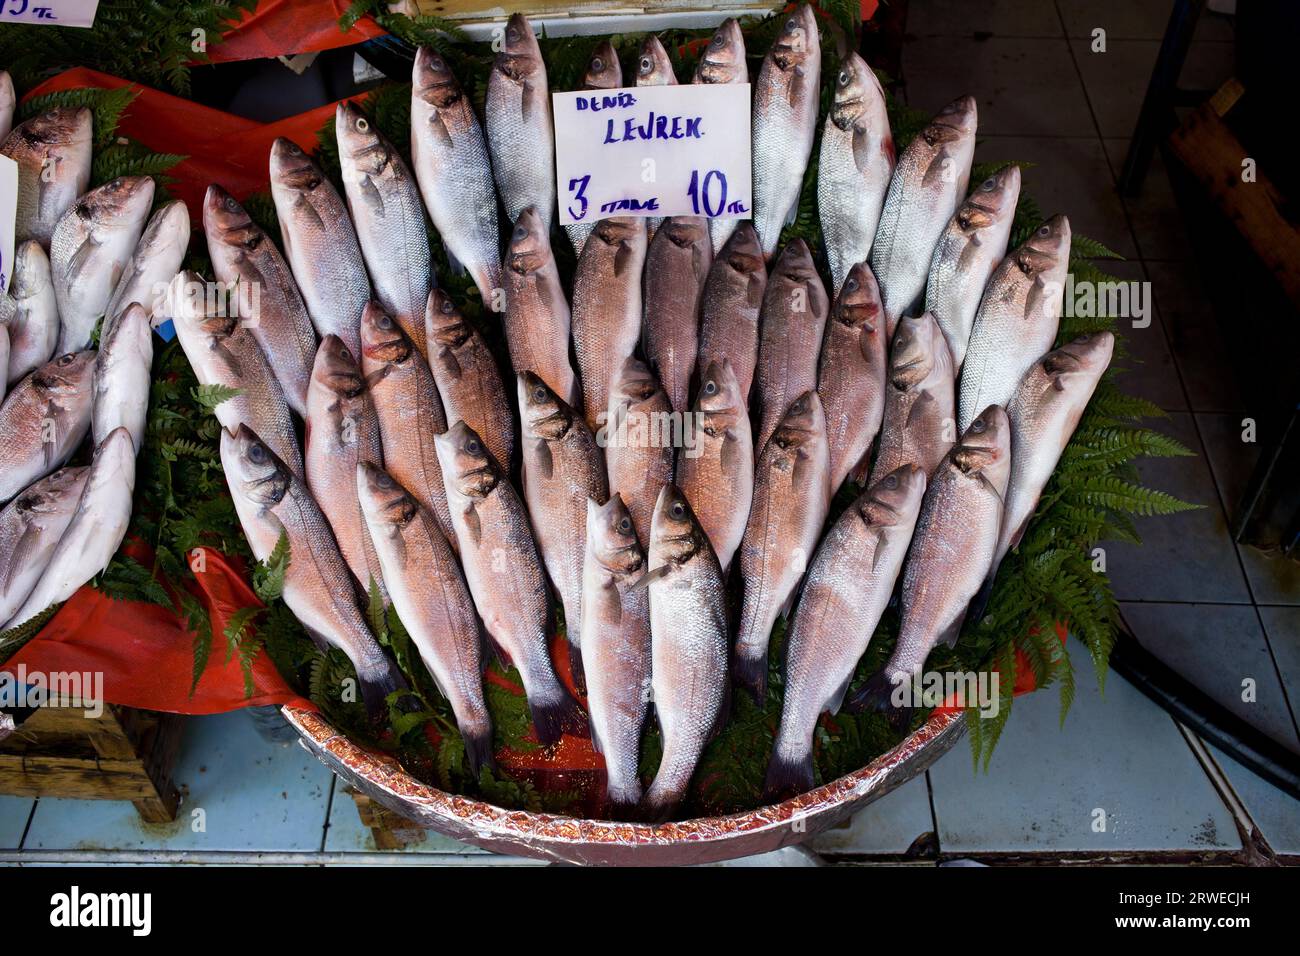 Fish market stall in Istanbul, Turkey with fresh sea bass fishes, price tag in Turkish Stock Photo